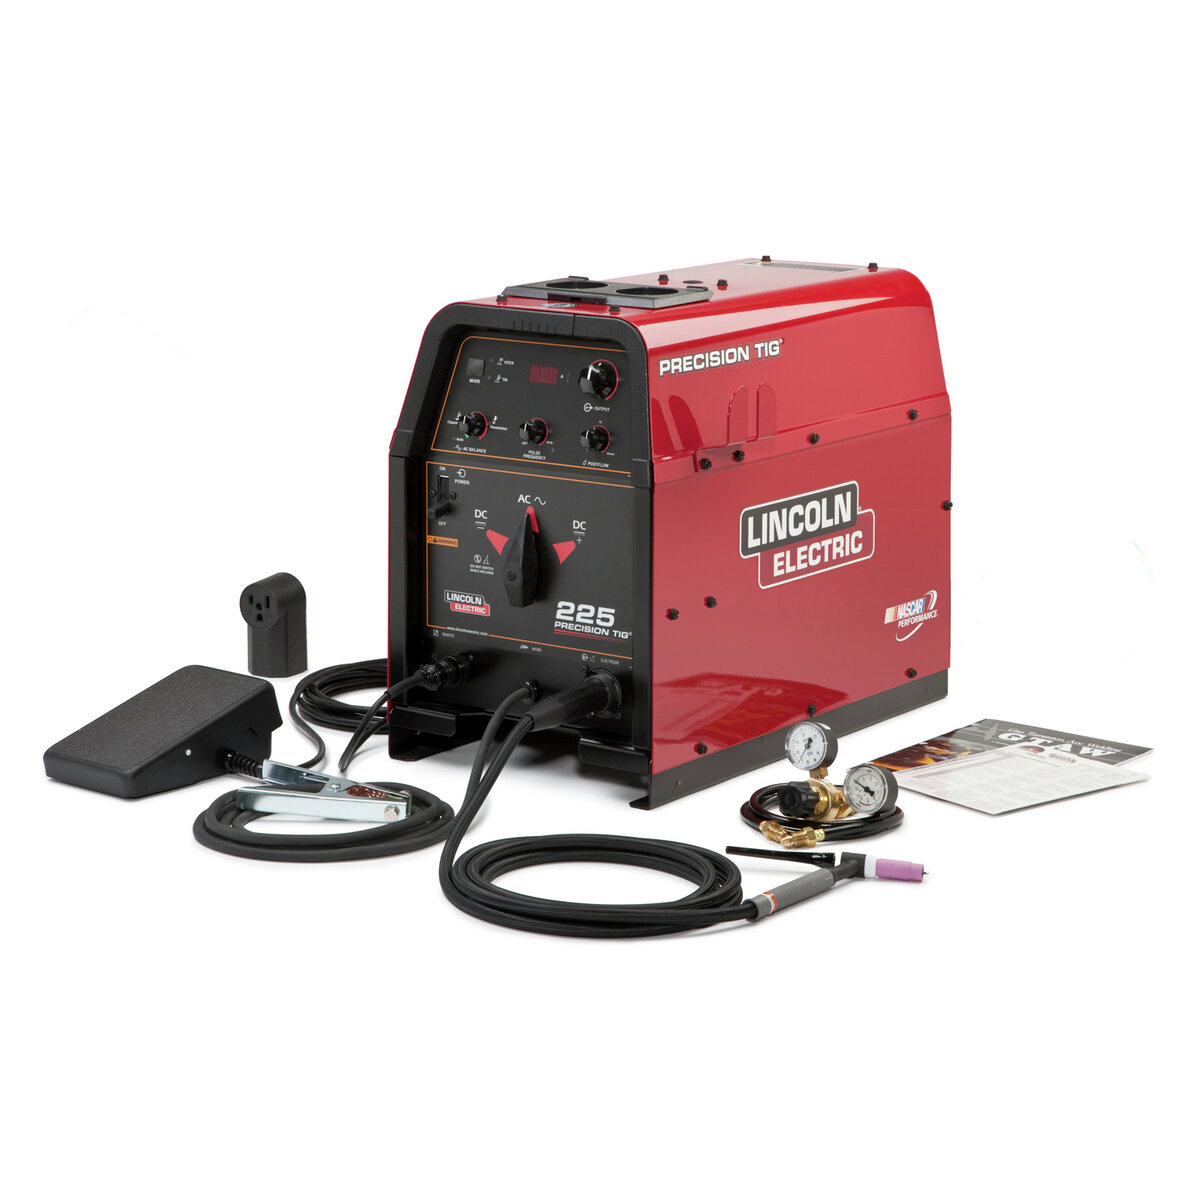 Precision TIG 225 welder features the widest welding range for automotive and motorsports TIG welding.